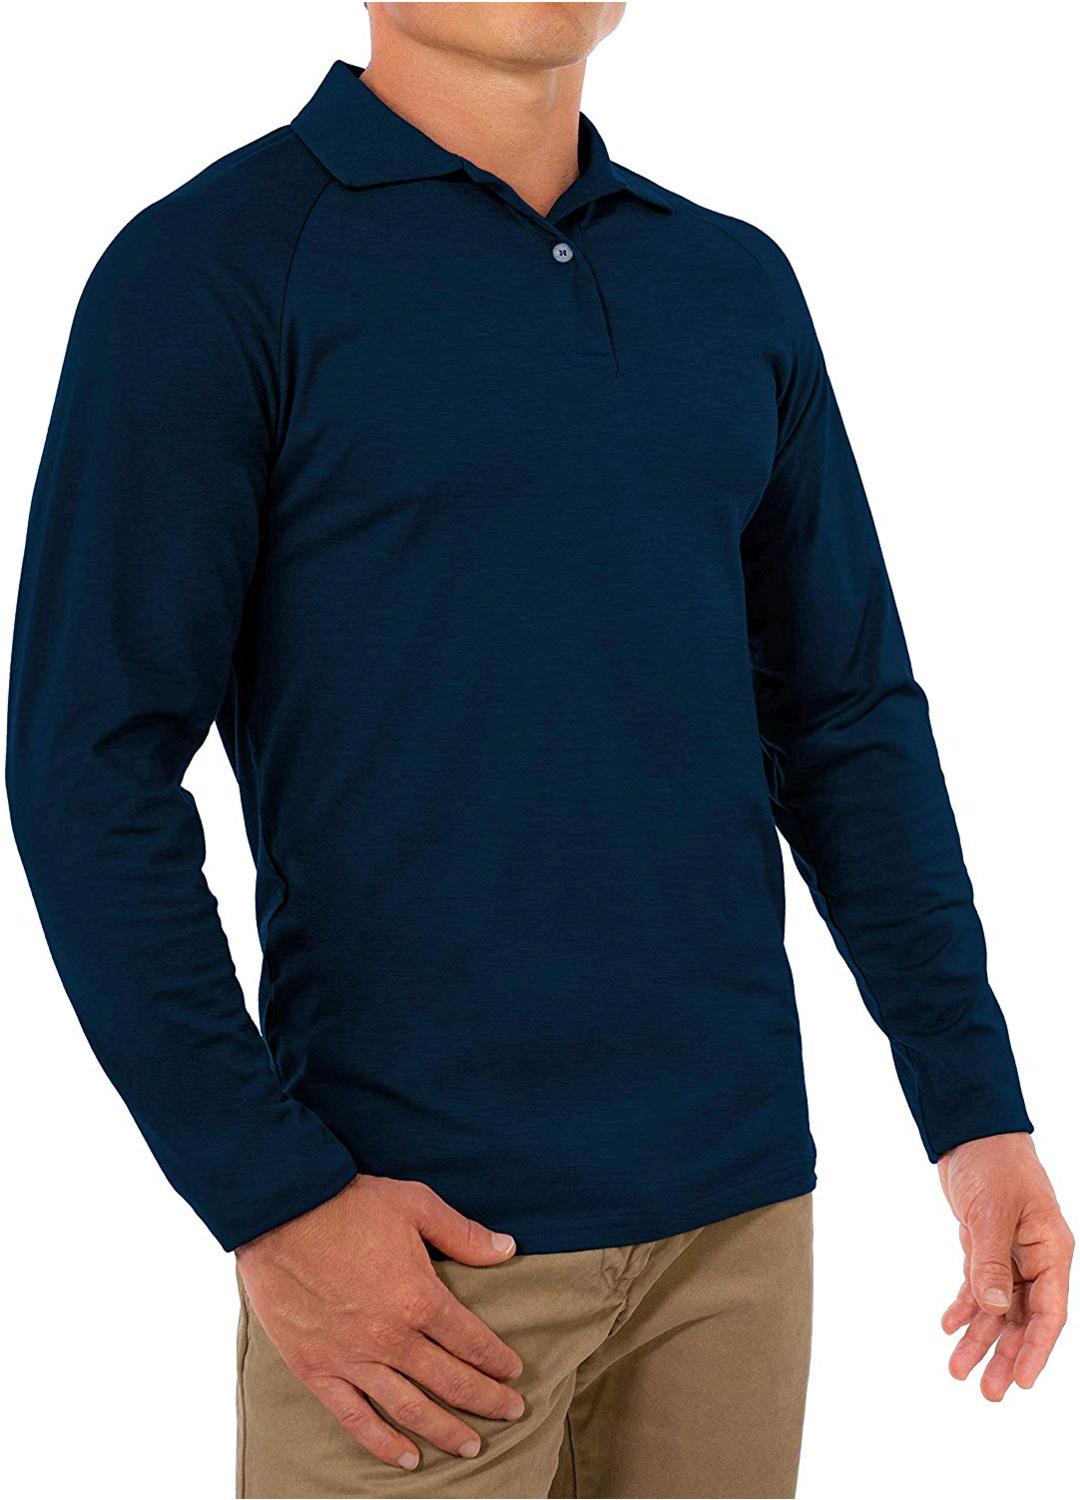 CC Perfect Slim Fit Long Sleeve Polo Shirts for Men |, Navy Blue, Size